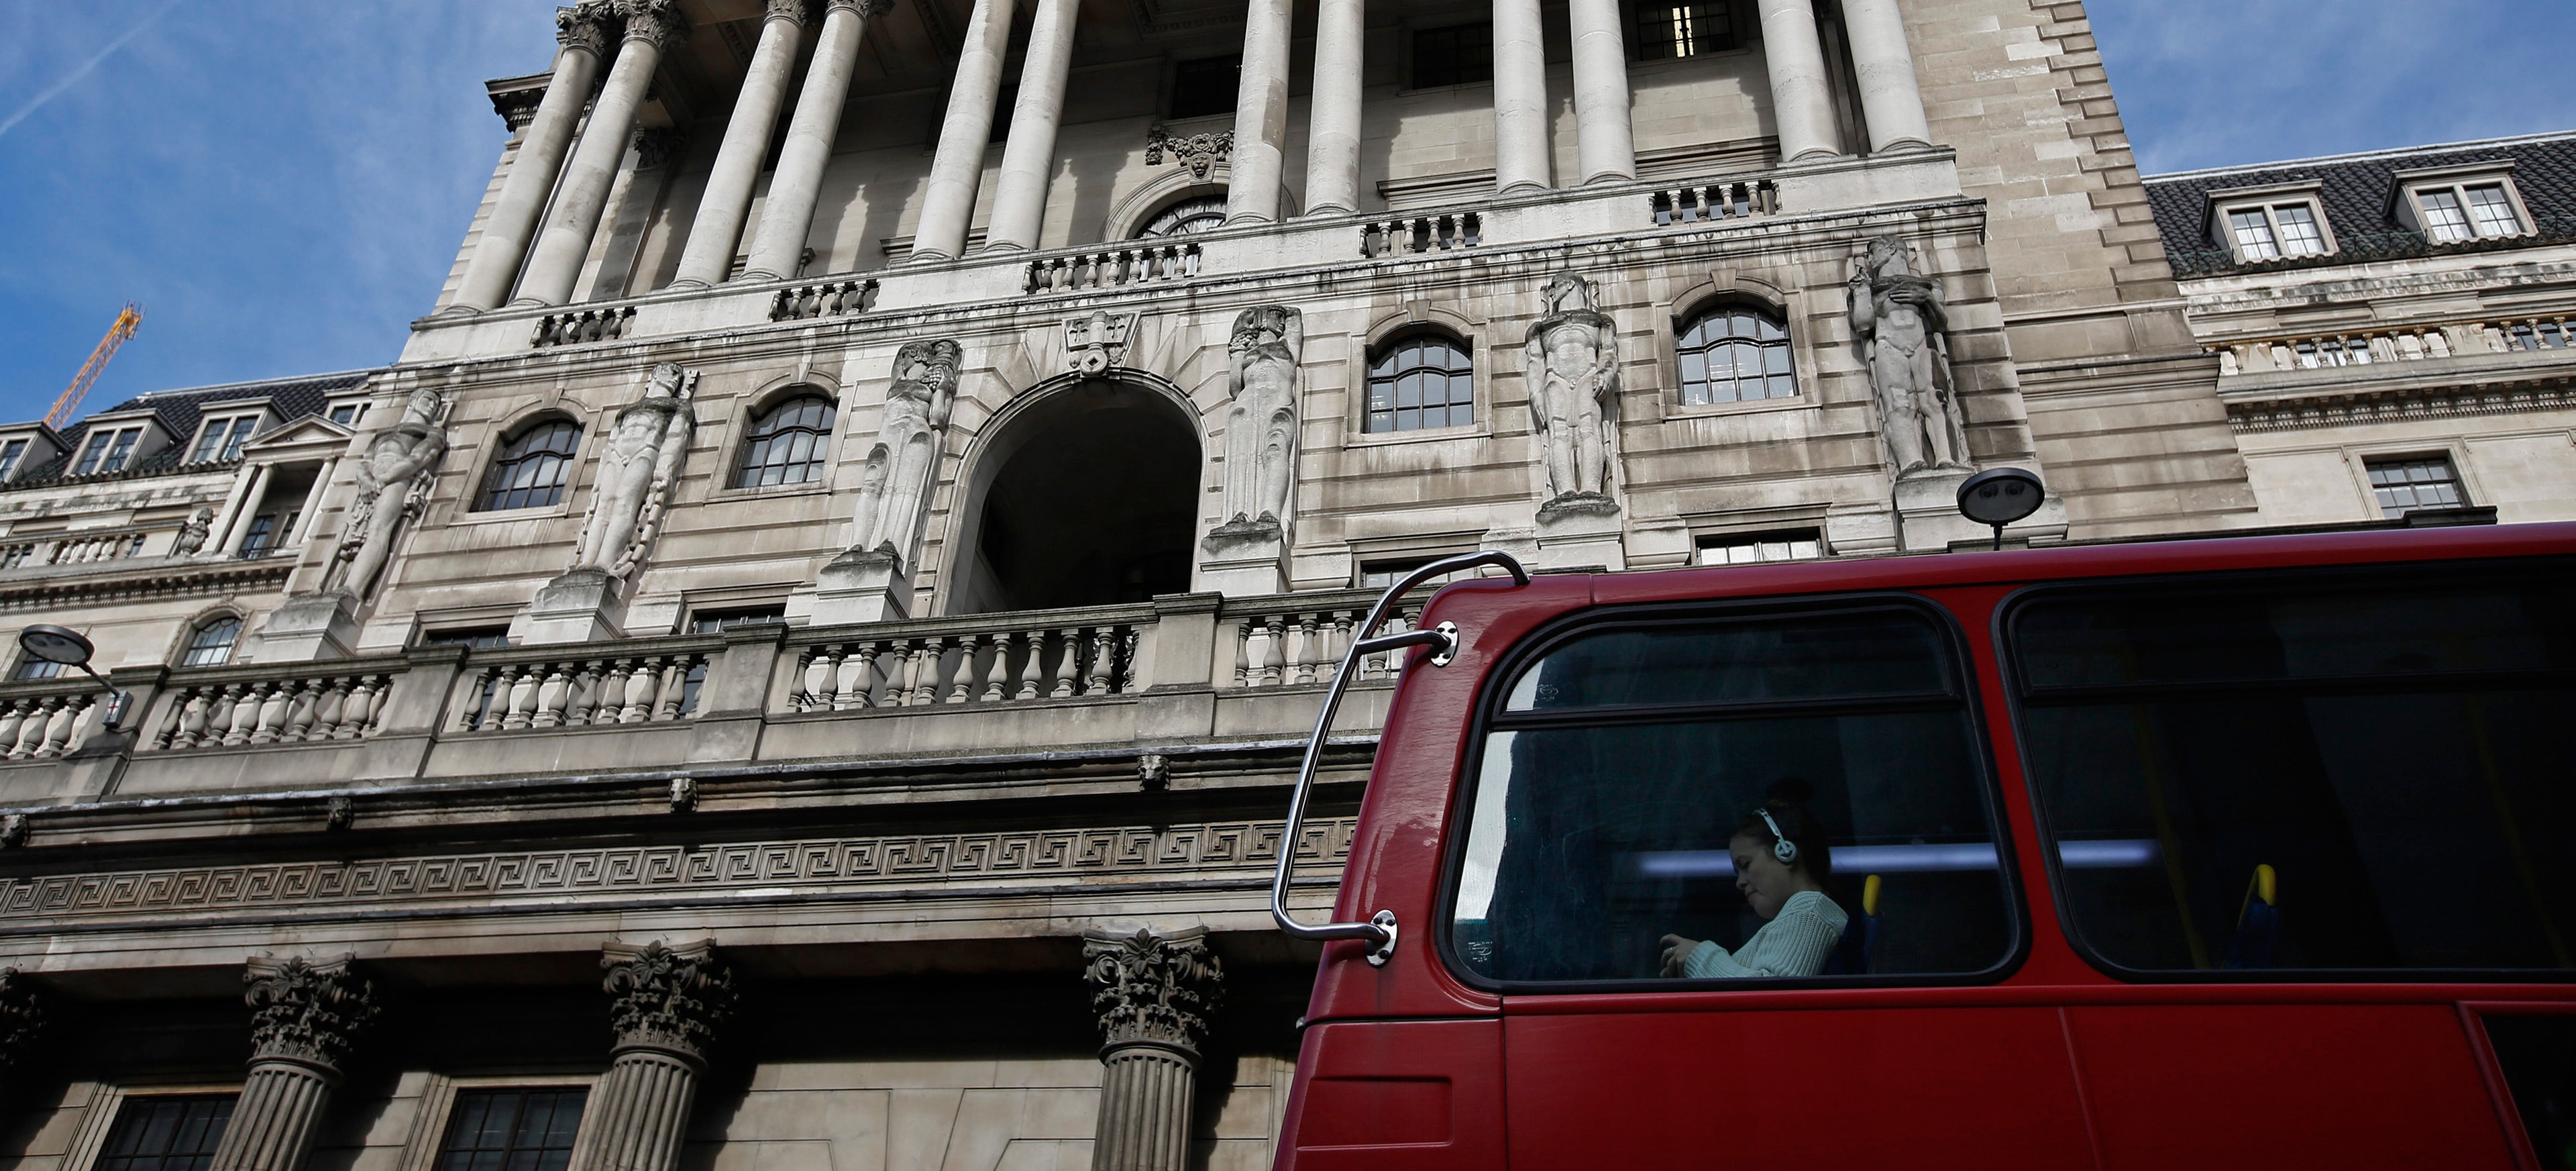 BoE’s Regulatory Arm Warns Financial Firms of Crypto-Assets Risks